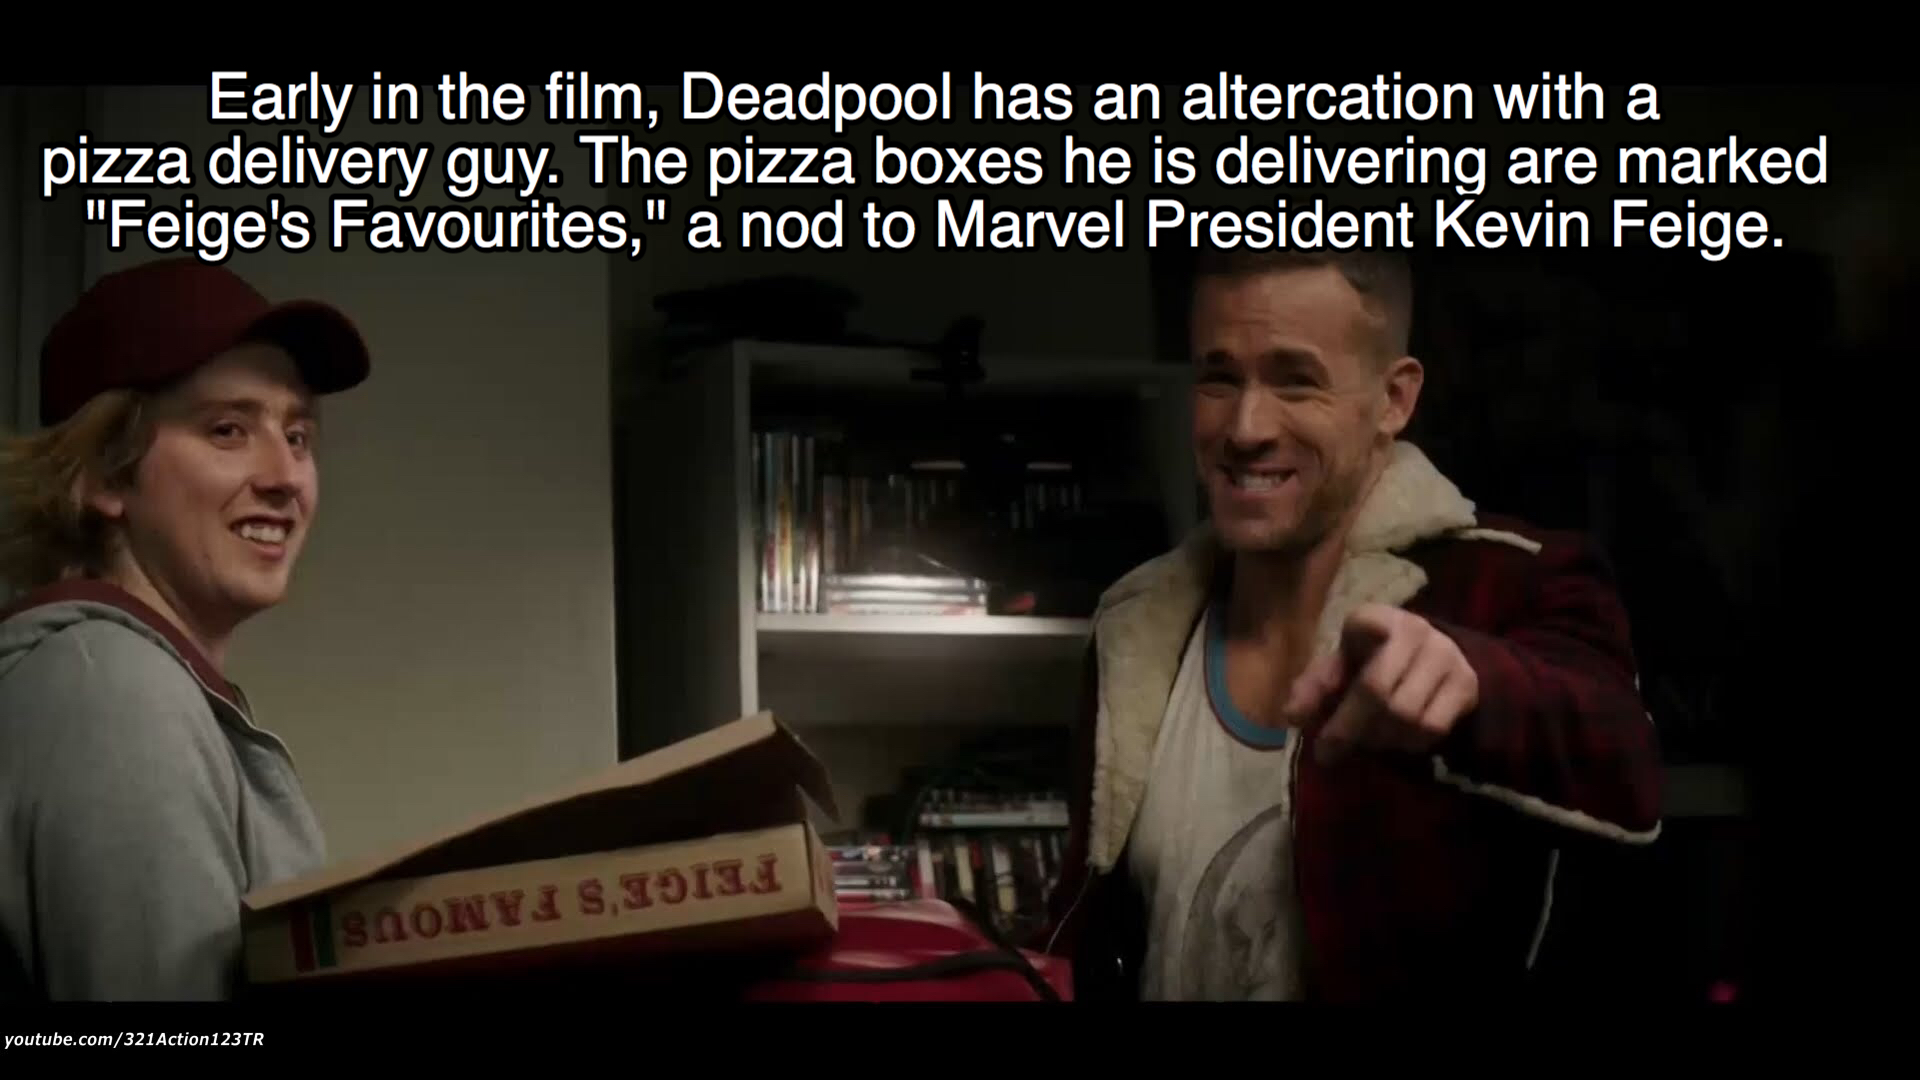 marvel memes - Early in the film, Deadpool has an altercation with a pizza delivery guy. The pizza boxes he is delivering are marked "Feige's Favourites," a nod to Marvel President Kevin Feige. Sonya 3,3513 youtube.com32Action Zitr